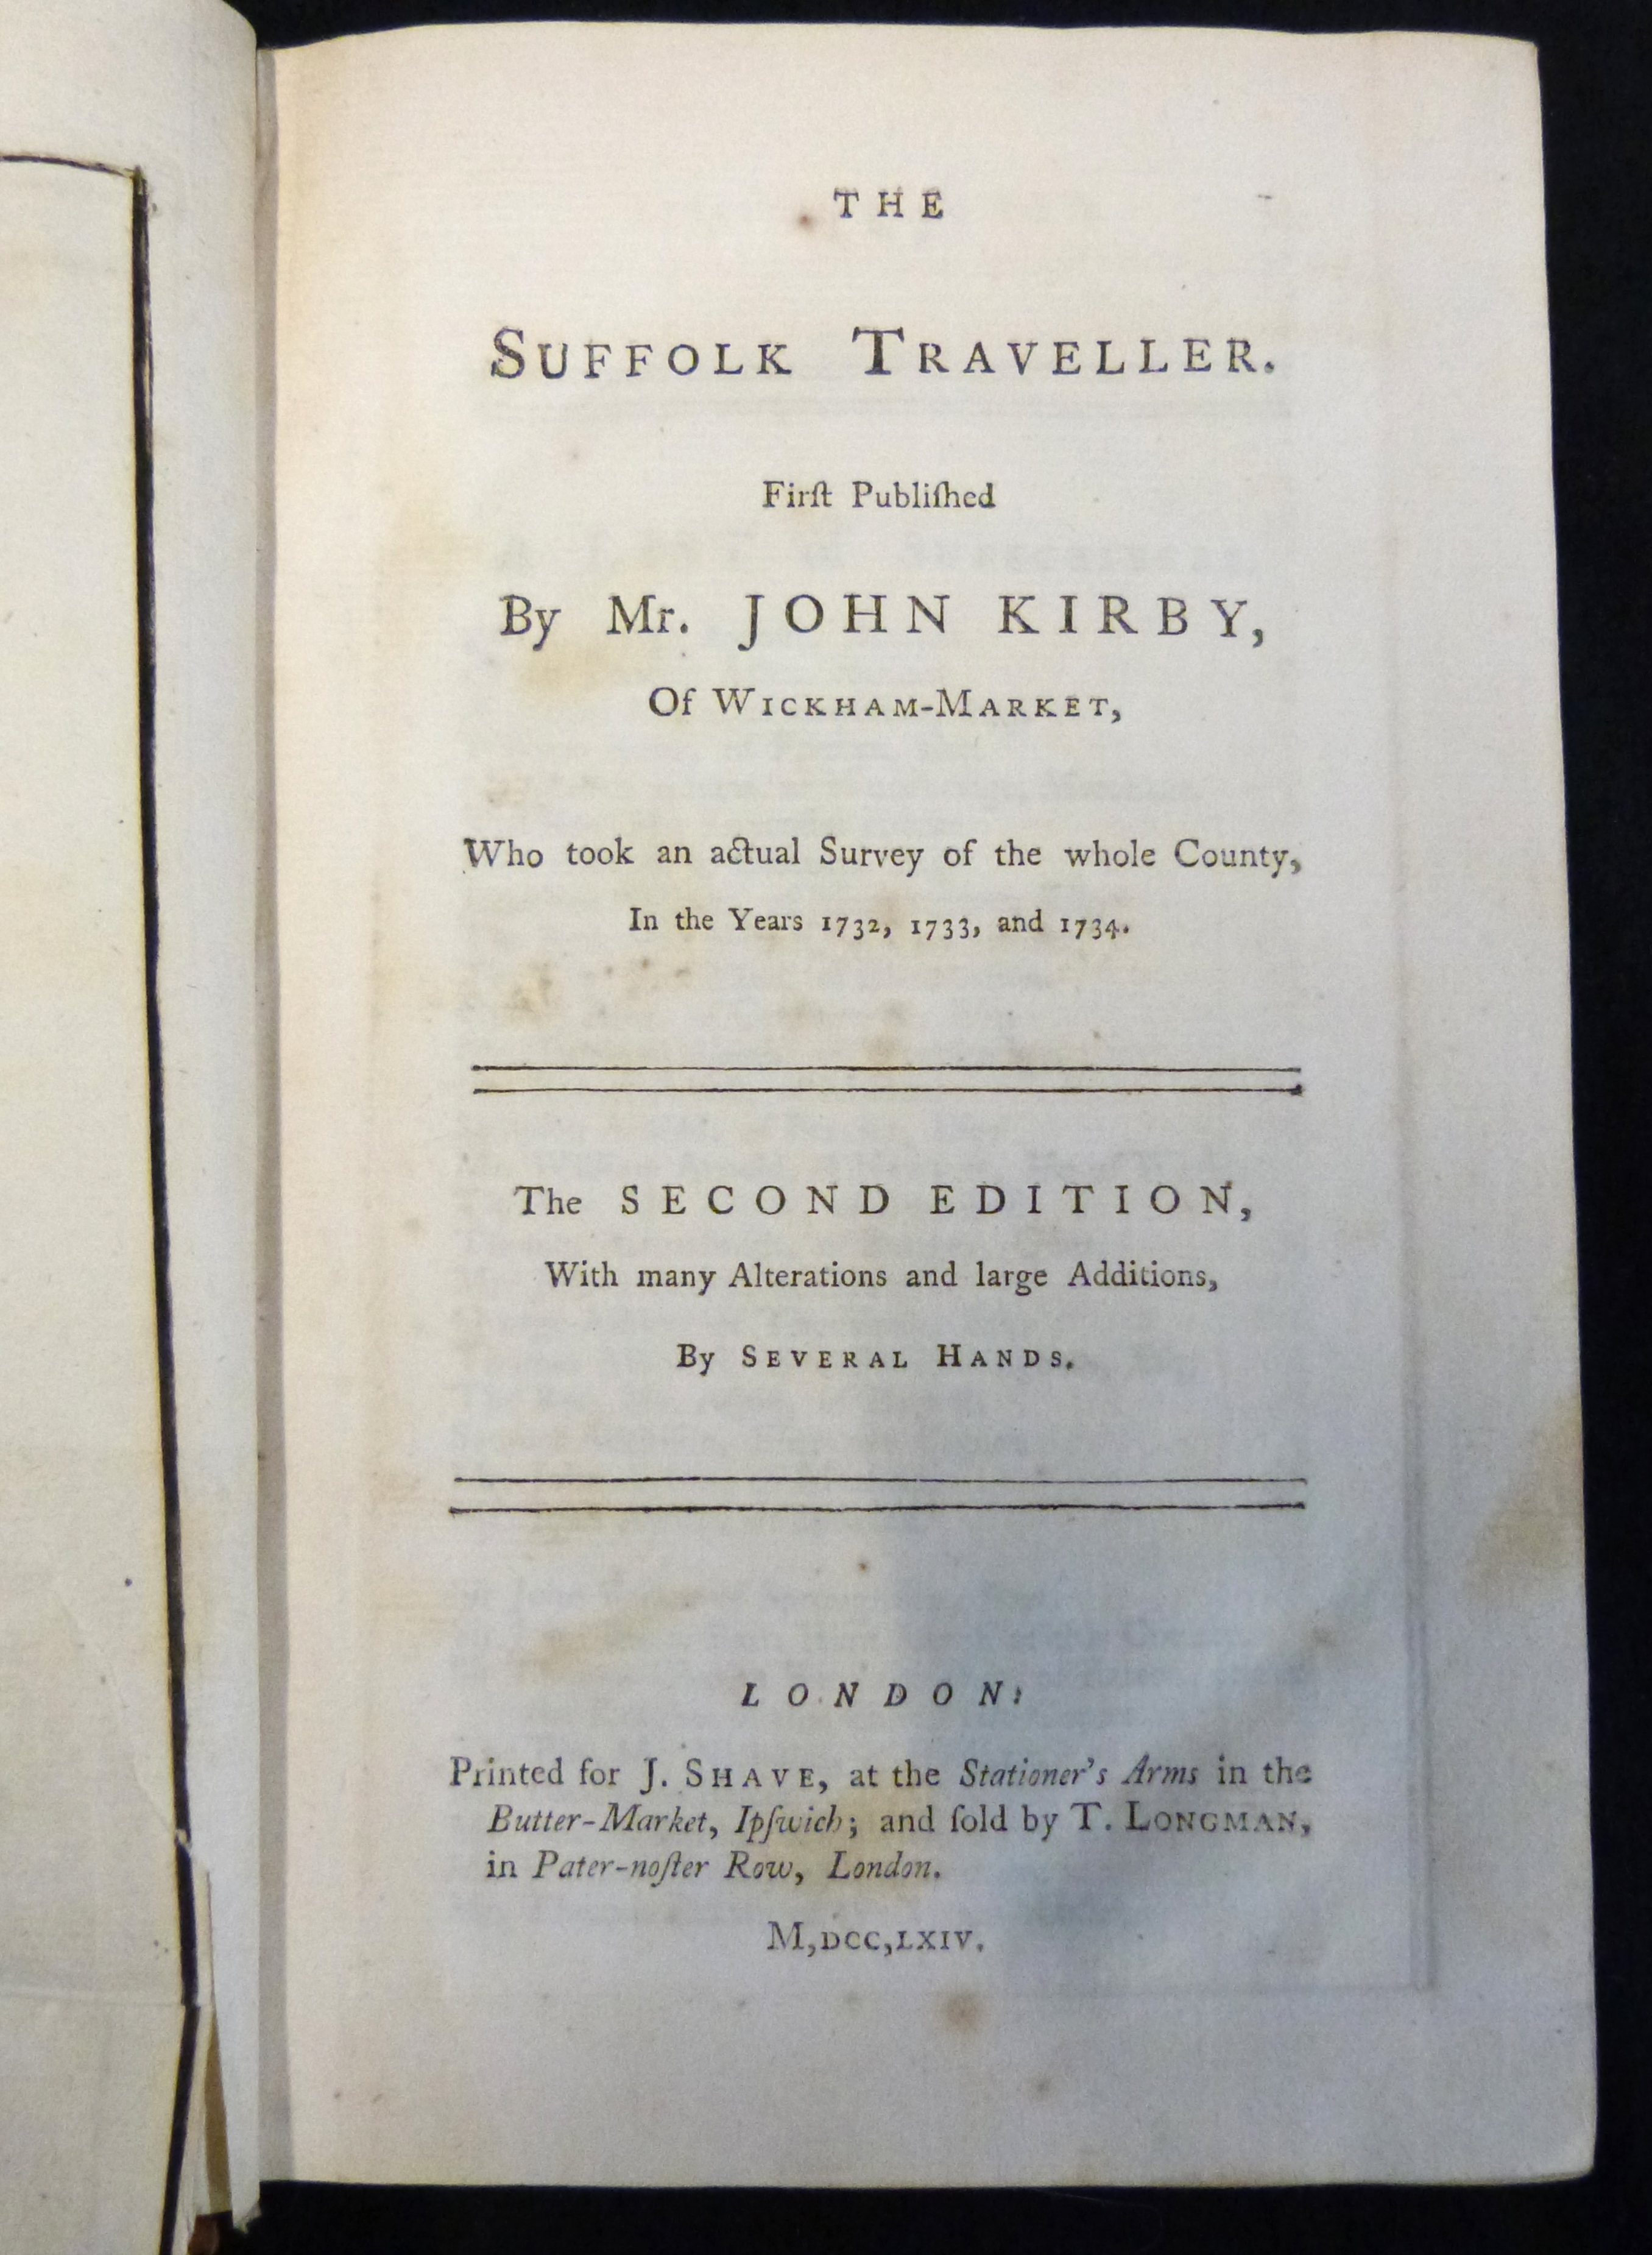 JOHN KIRBY: THE SUFFOLK TRAVELLER..., London, J Shave, 1764, 2nd edition, 5 engraved folding maps as